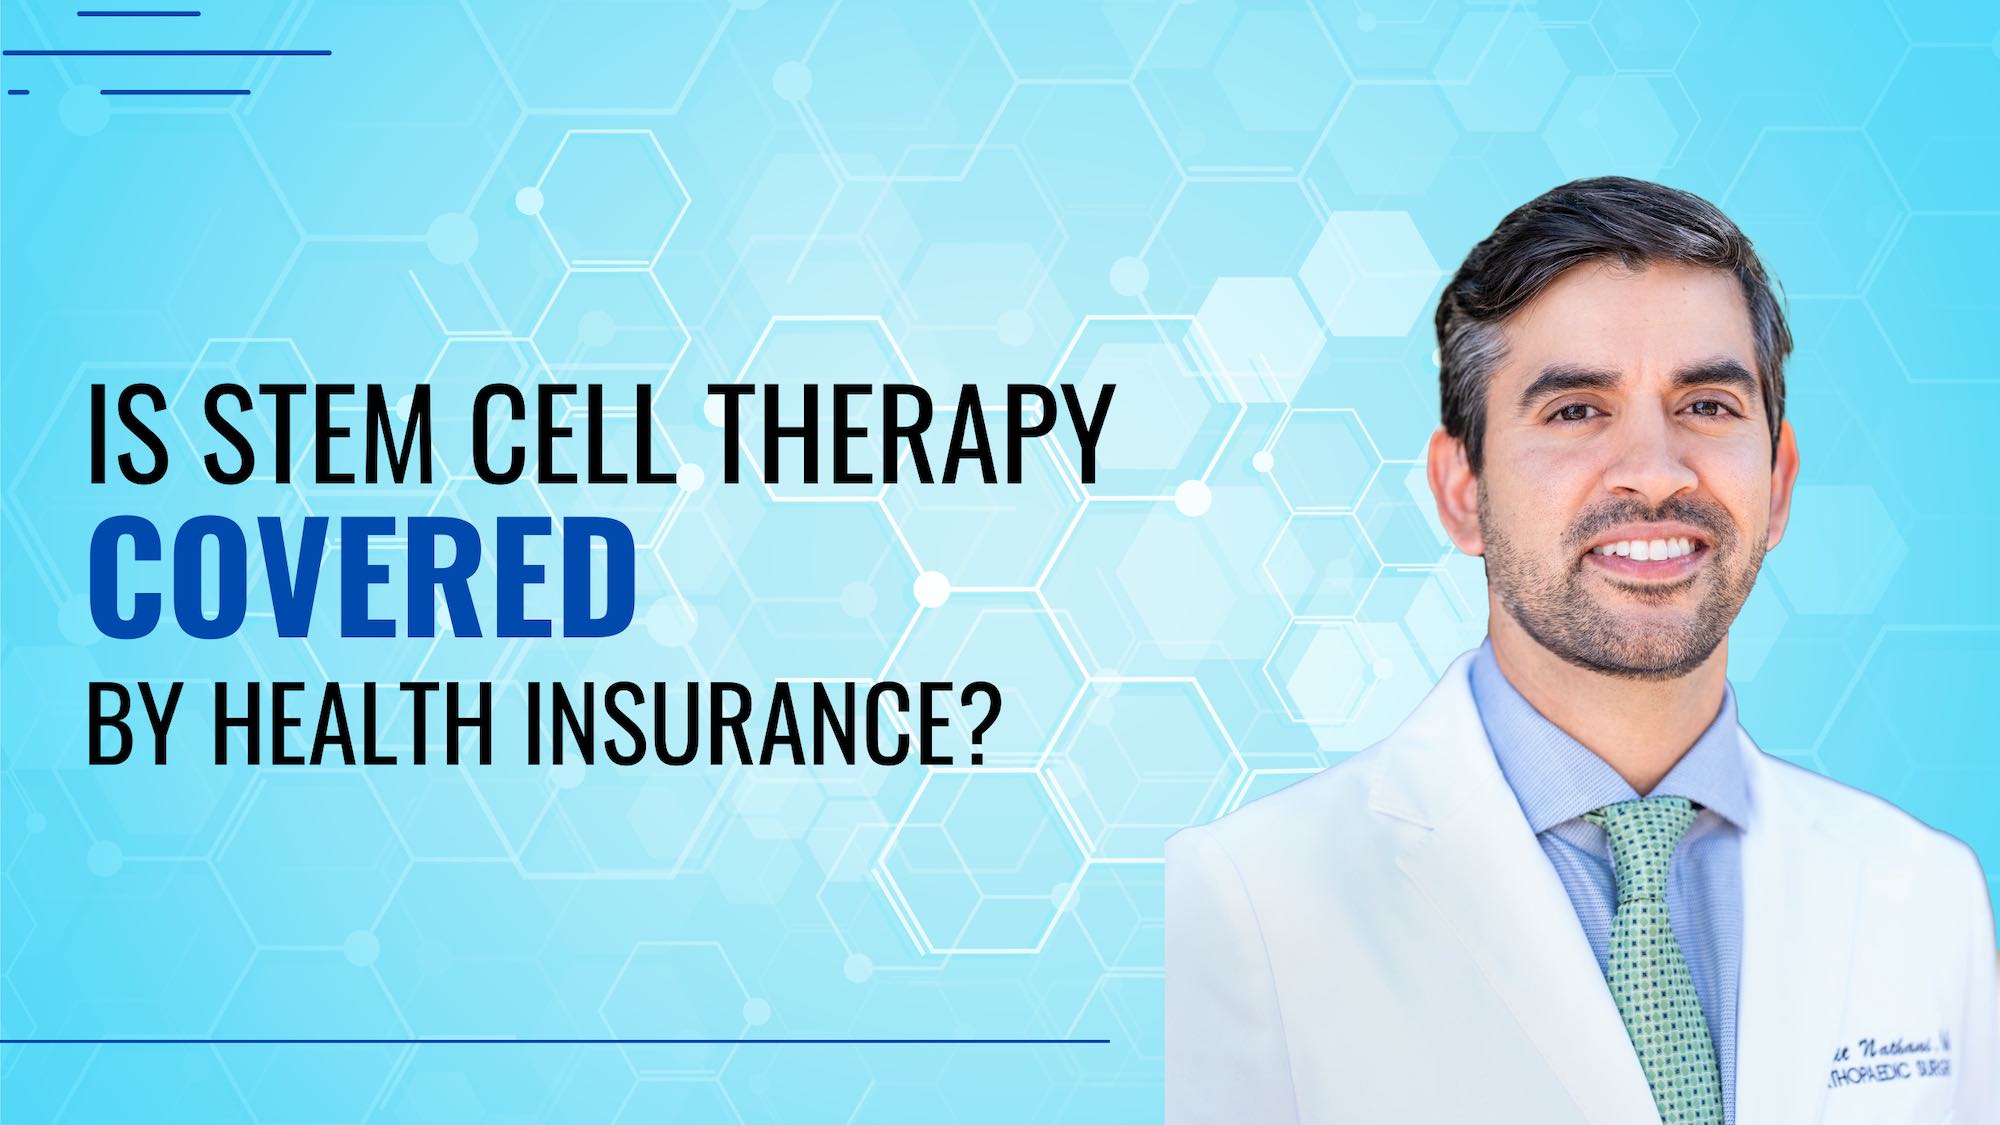 Is Stem Cell Therapy Covered by Insurance?